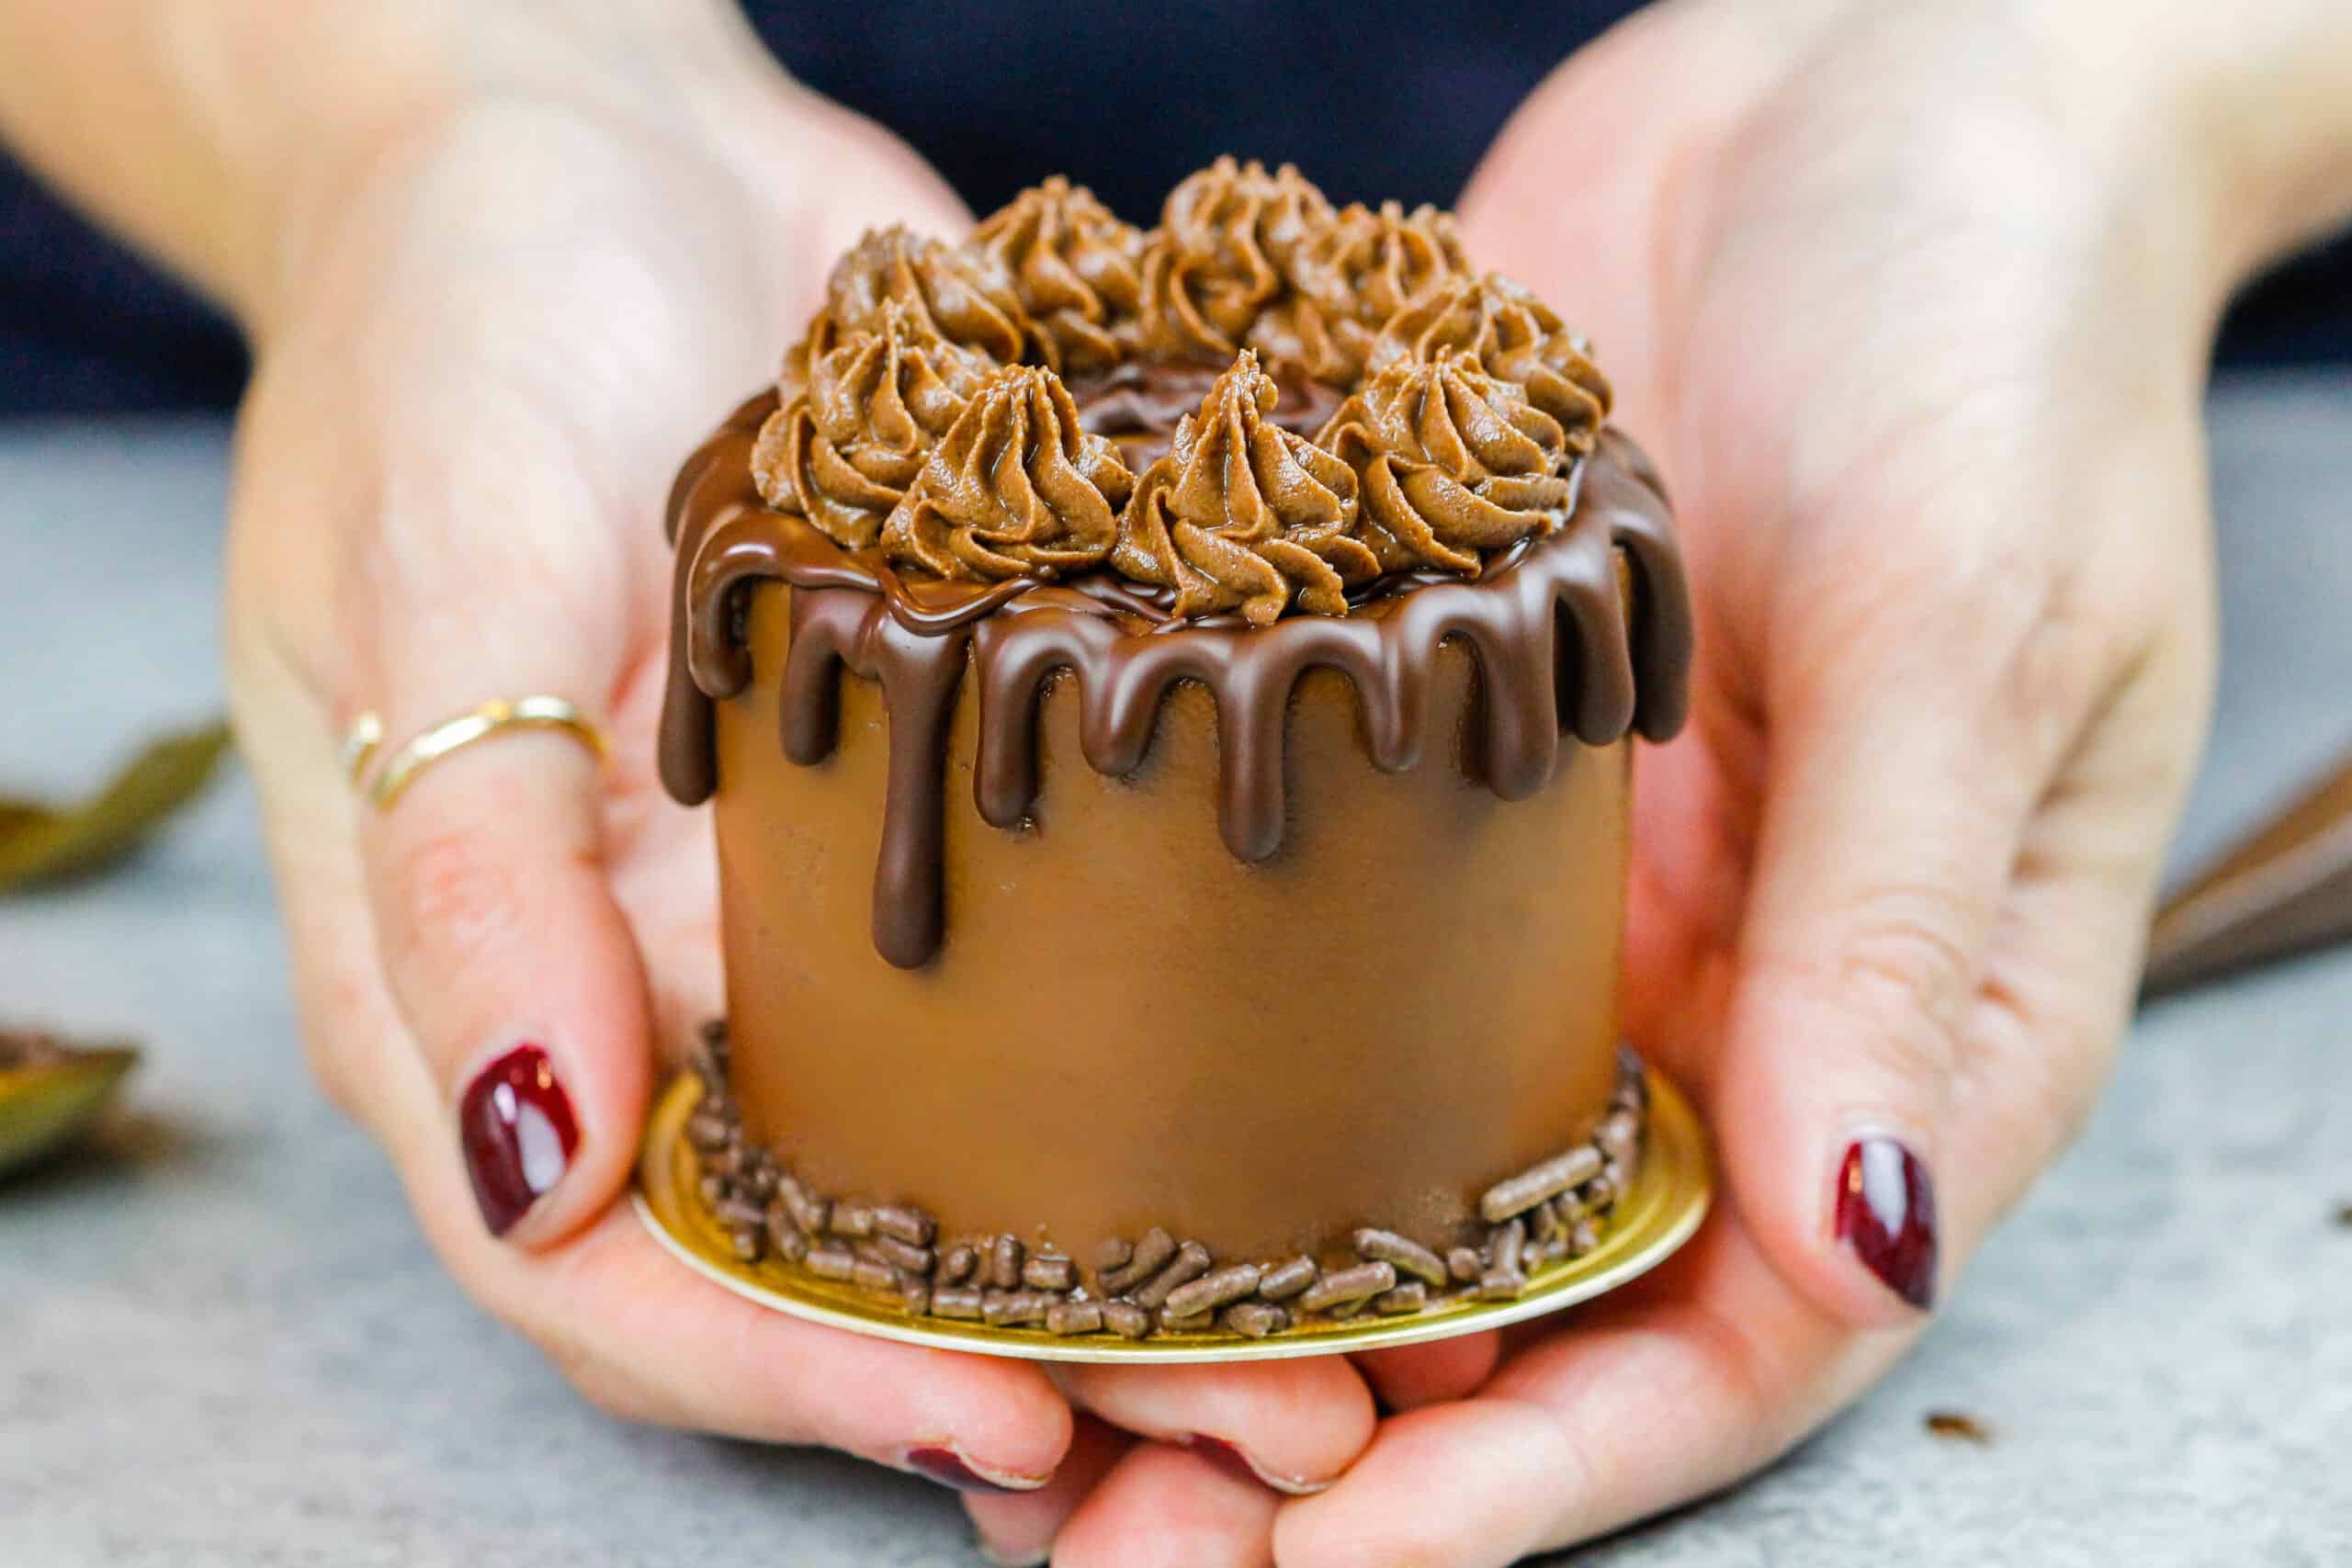 image of a mini chocolate cake made with 3-inch cake layers